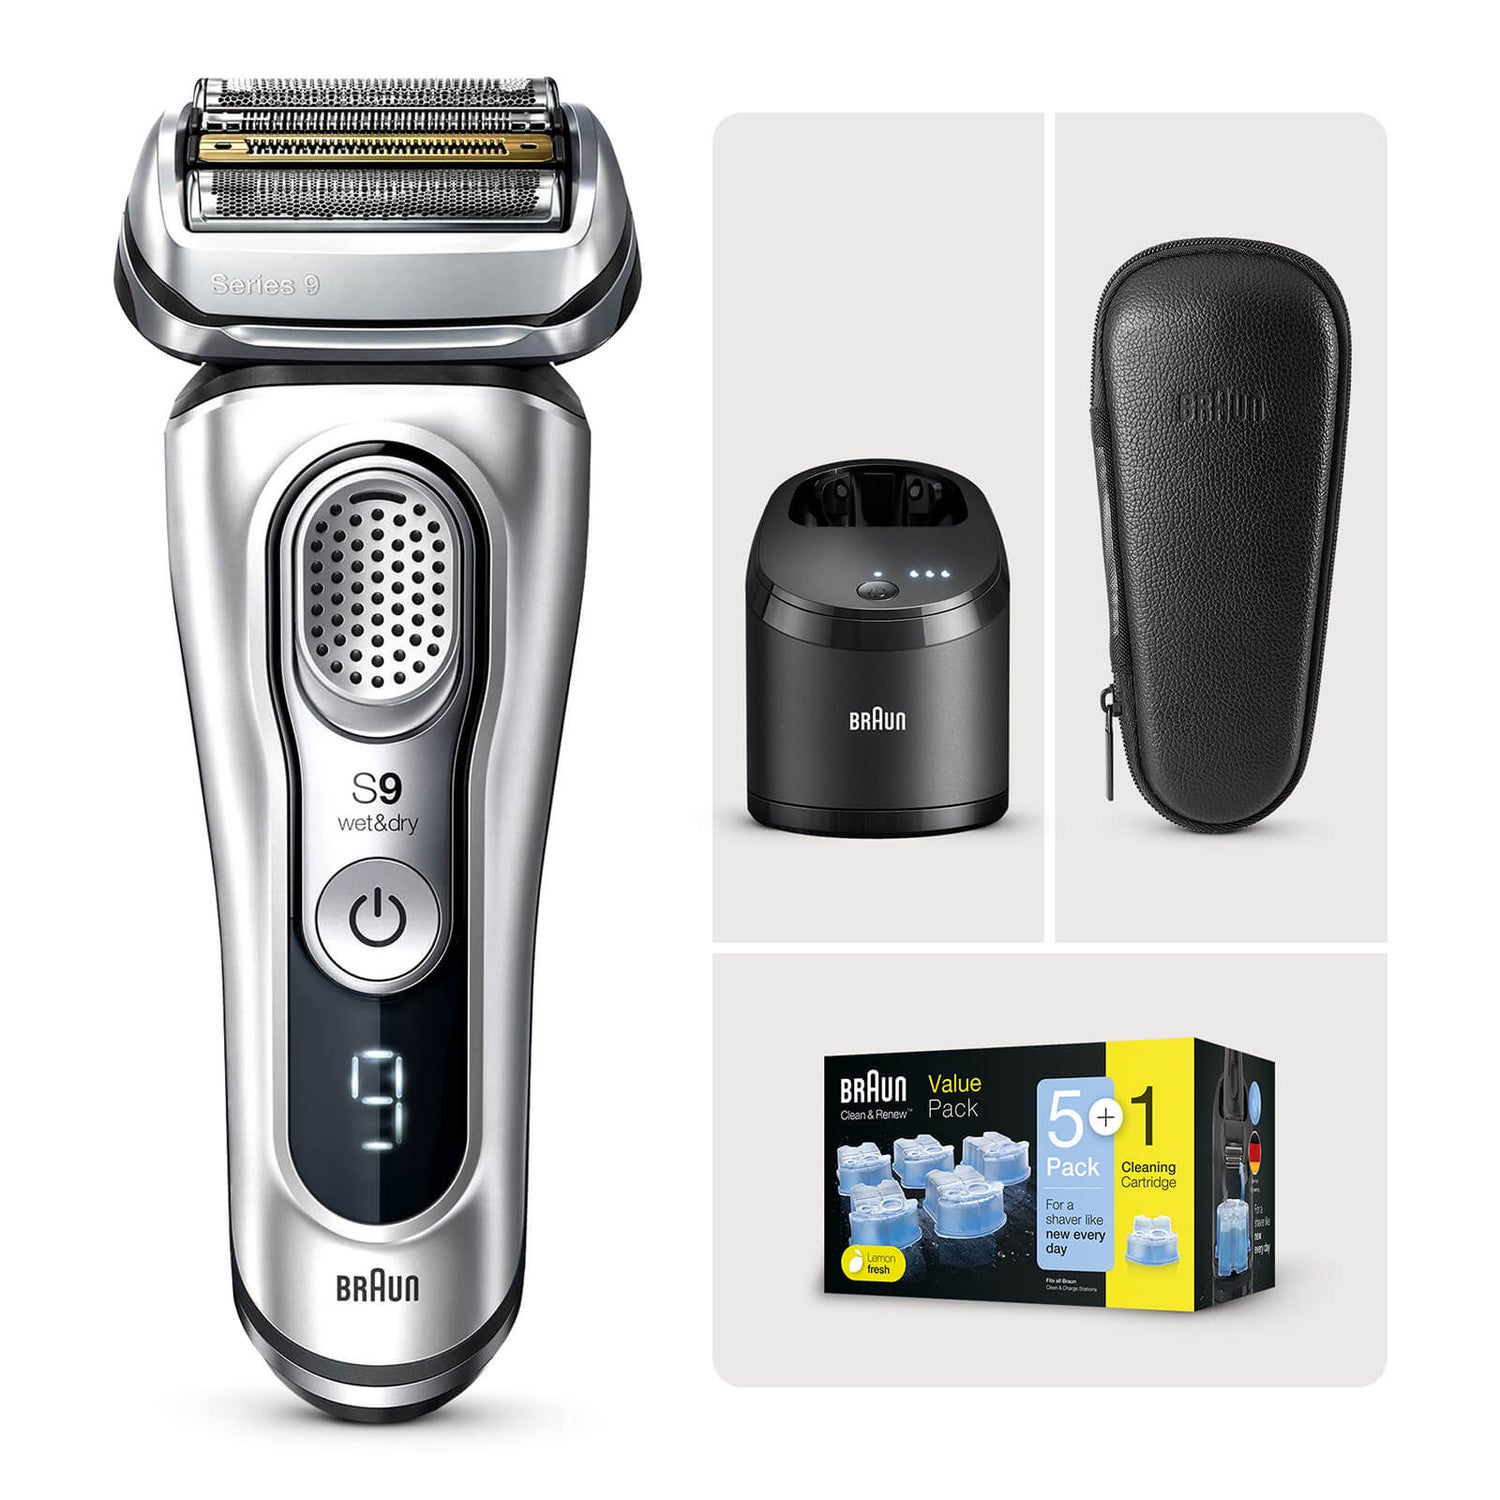 Braun Series 9 Shaver Bundle with SmartCare Center and Refill